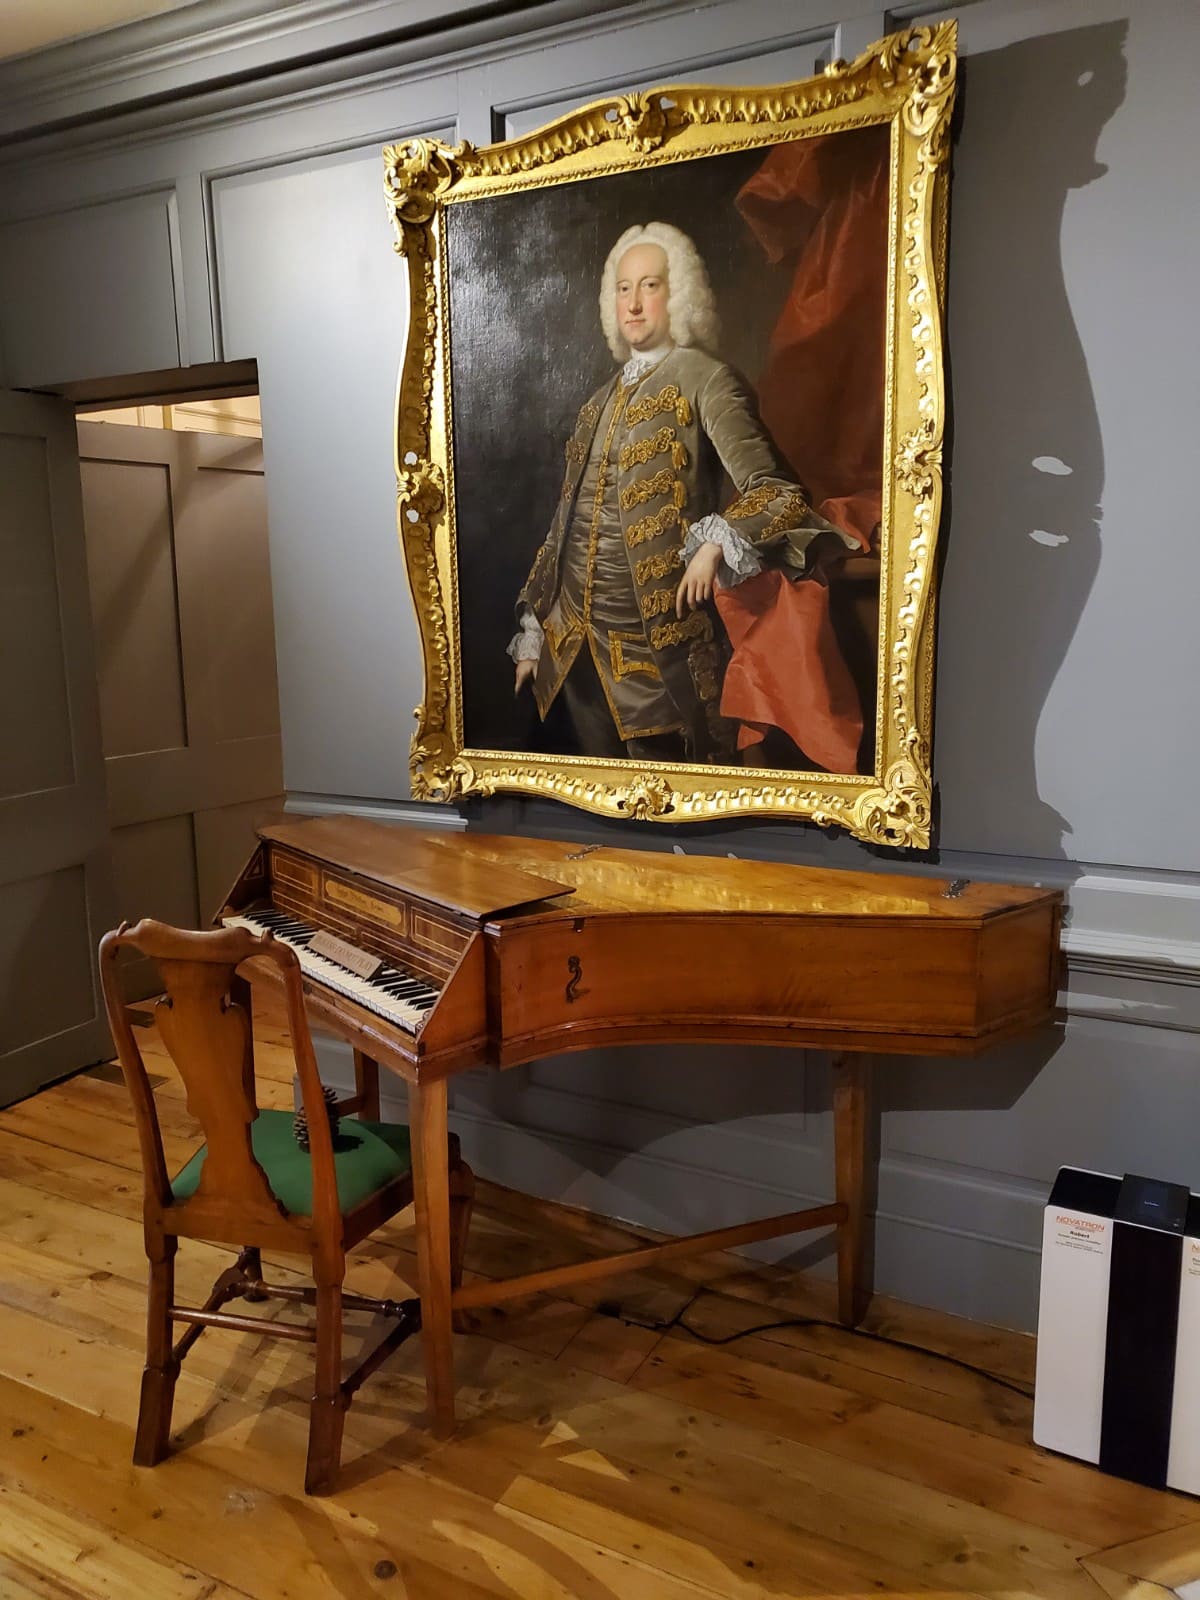 The Handel and Hendrix Museum in London